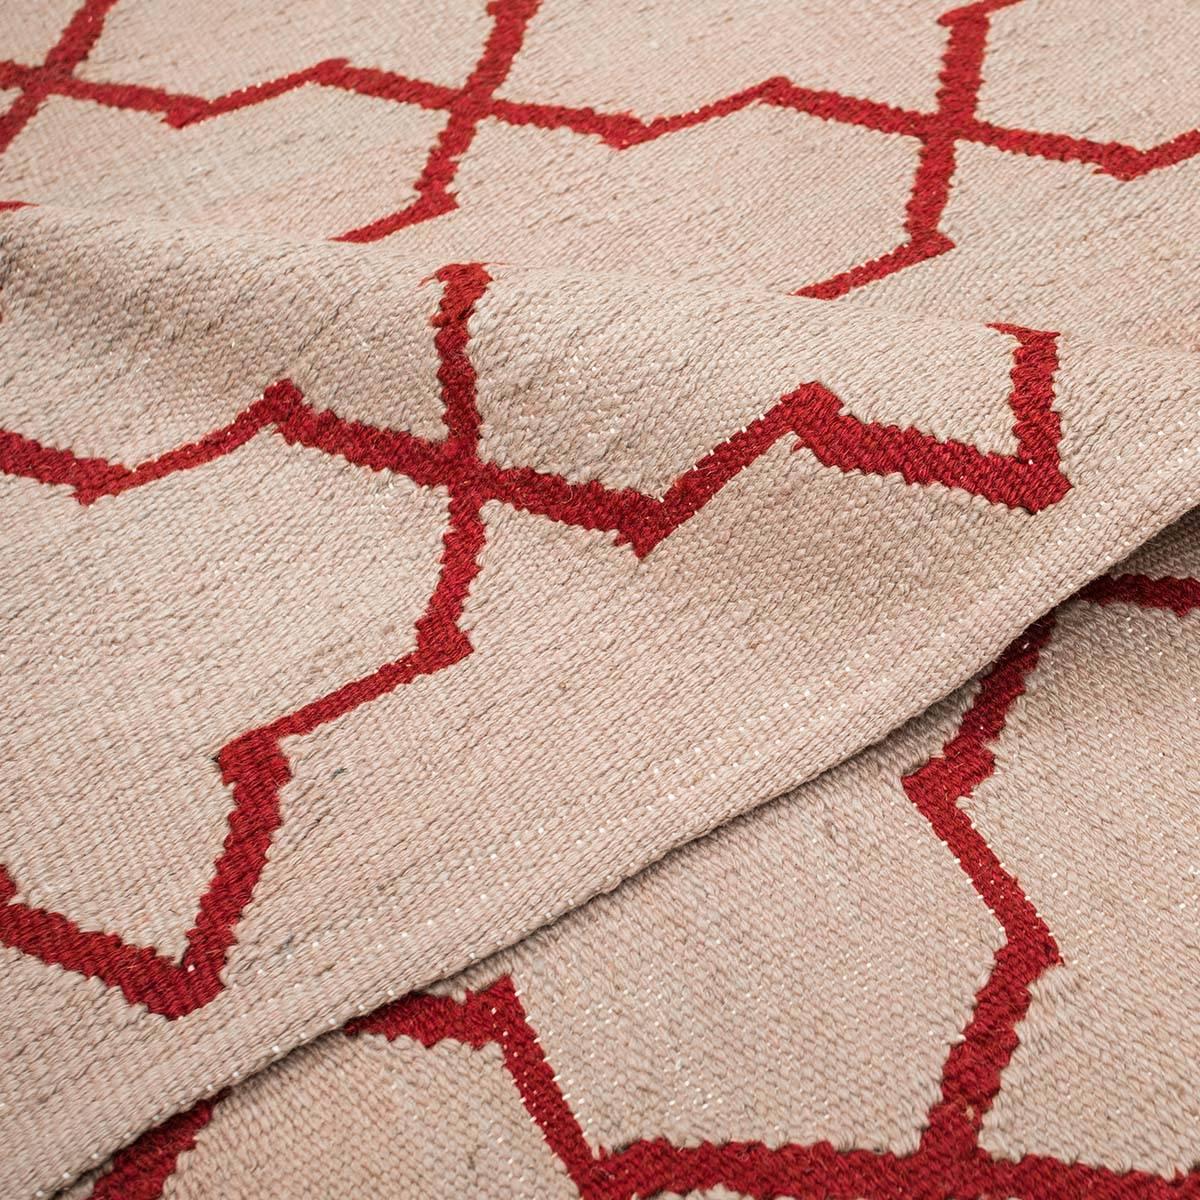 Egyptian Contemporary Flat-Weave, Geometric Design over Red Shades